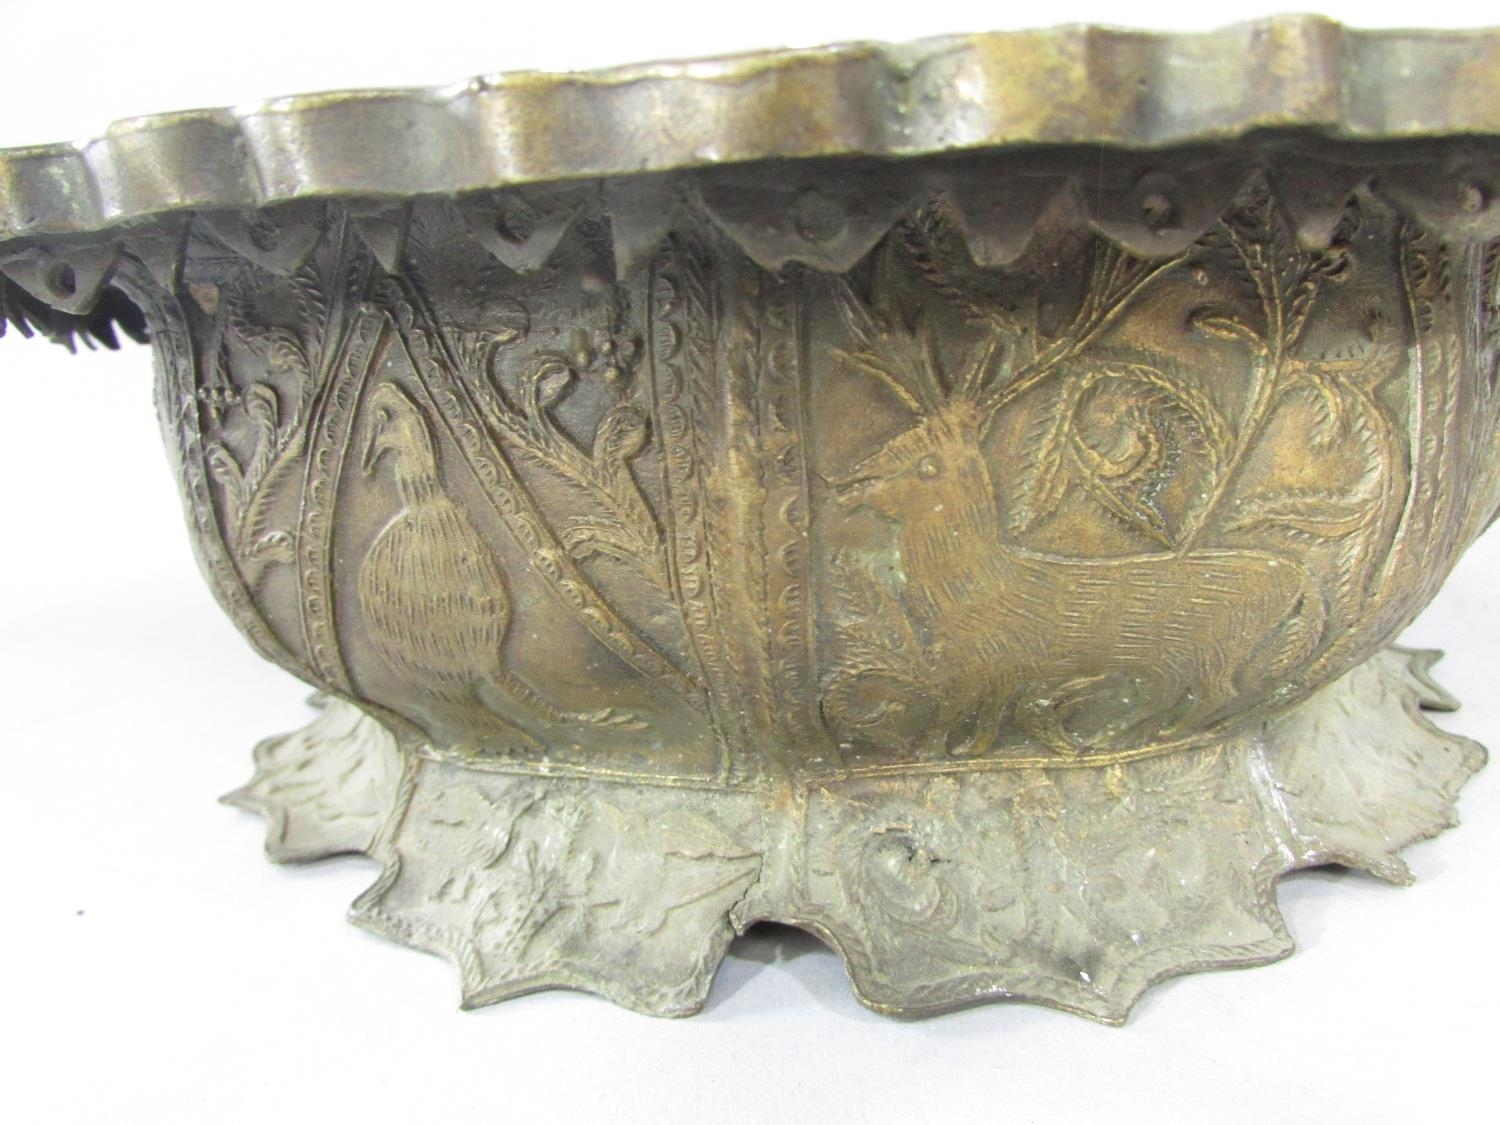 Two Indian brass vessels, both richly engraved with animals and flowers - Image 5 of 5